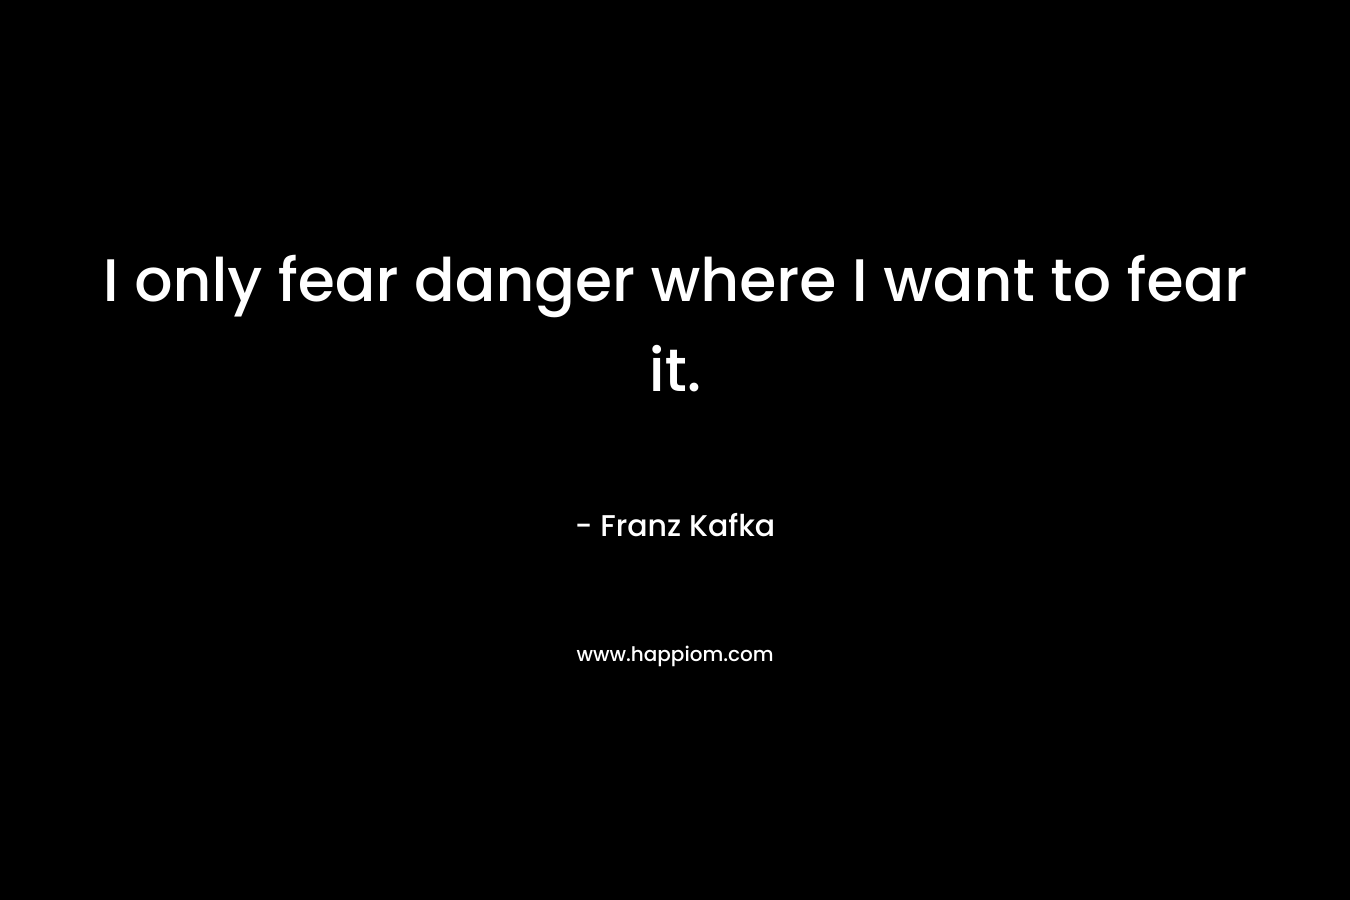 I only fear danger where I want to fear it.